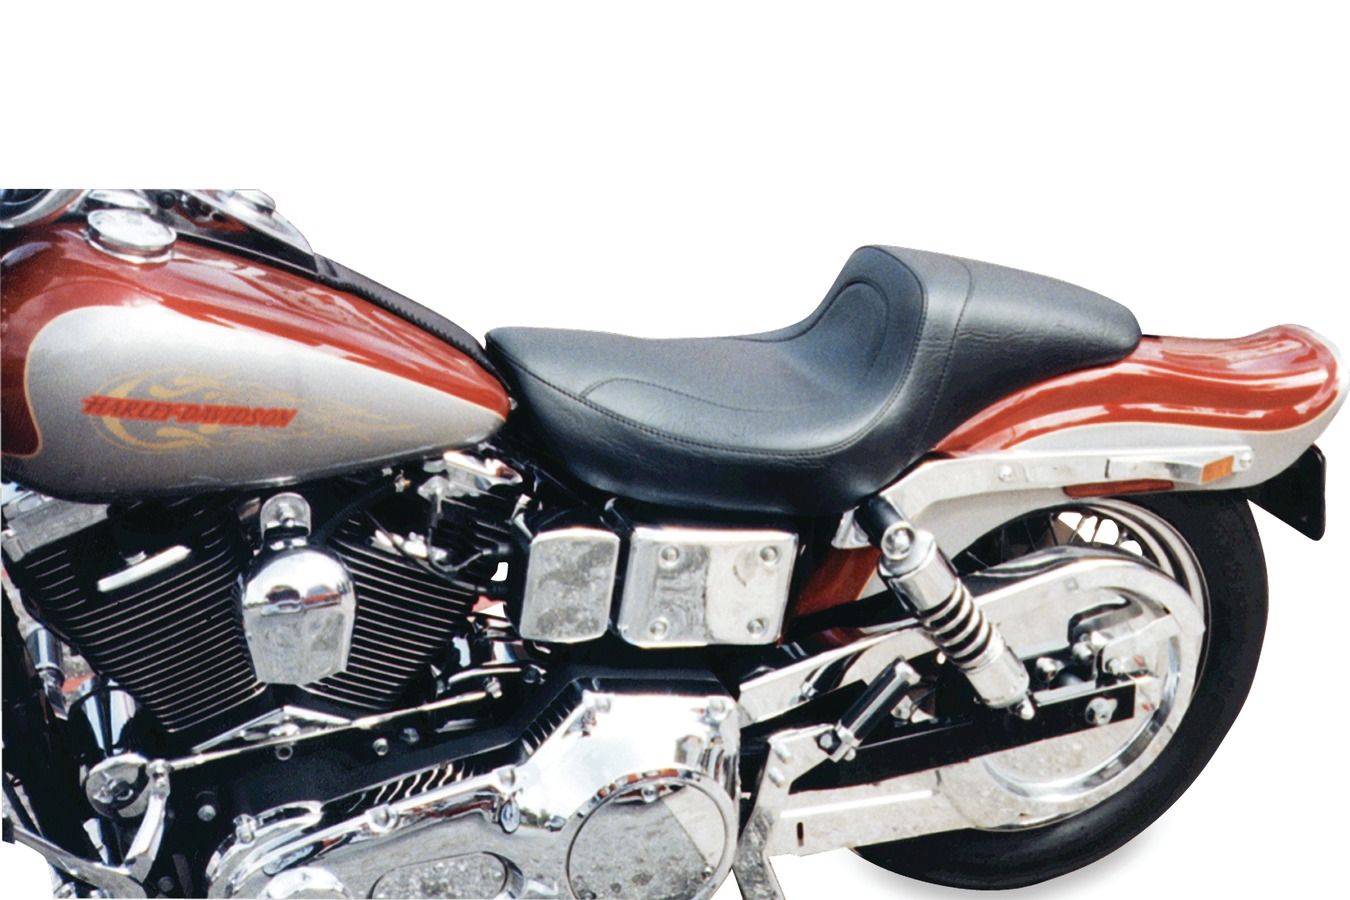 Fastback™ One-Piece Seat for Harley-Davidson Dyna 1991-